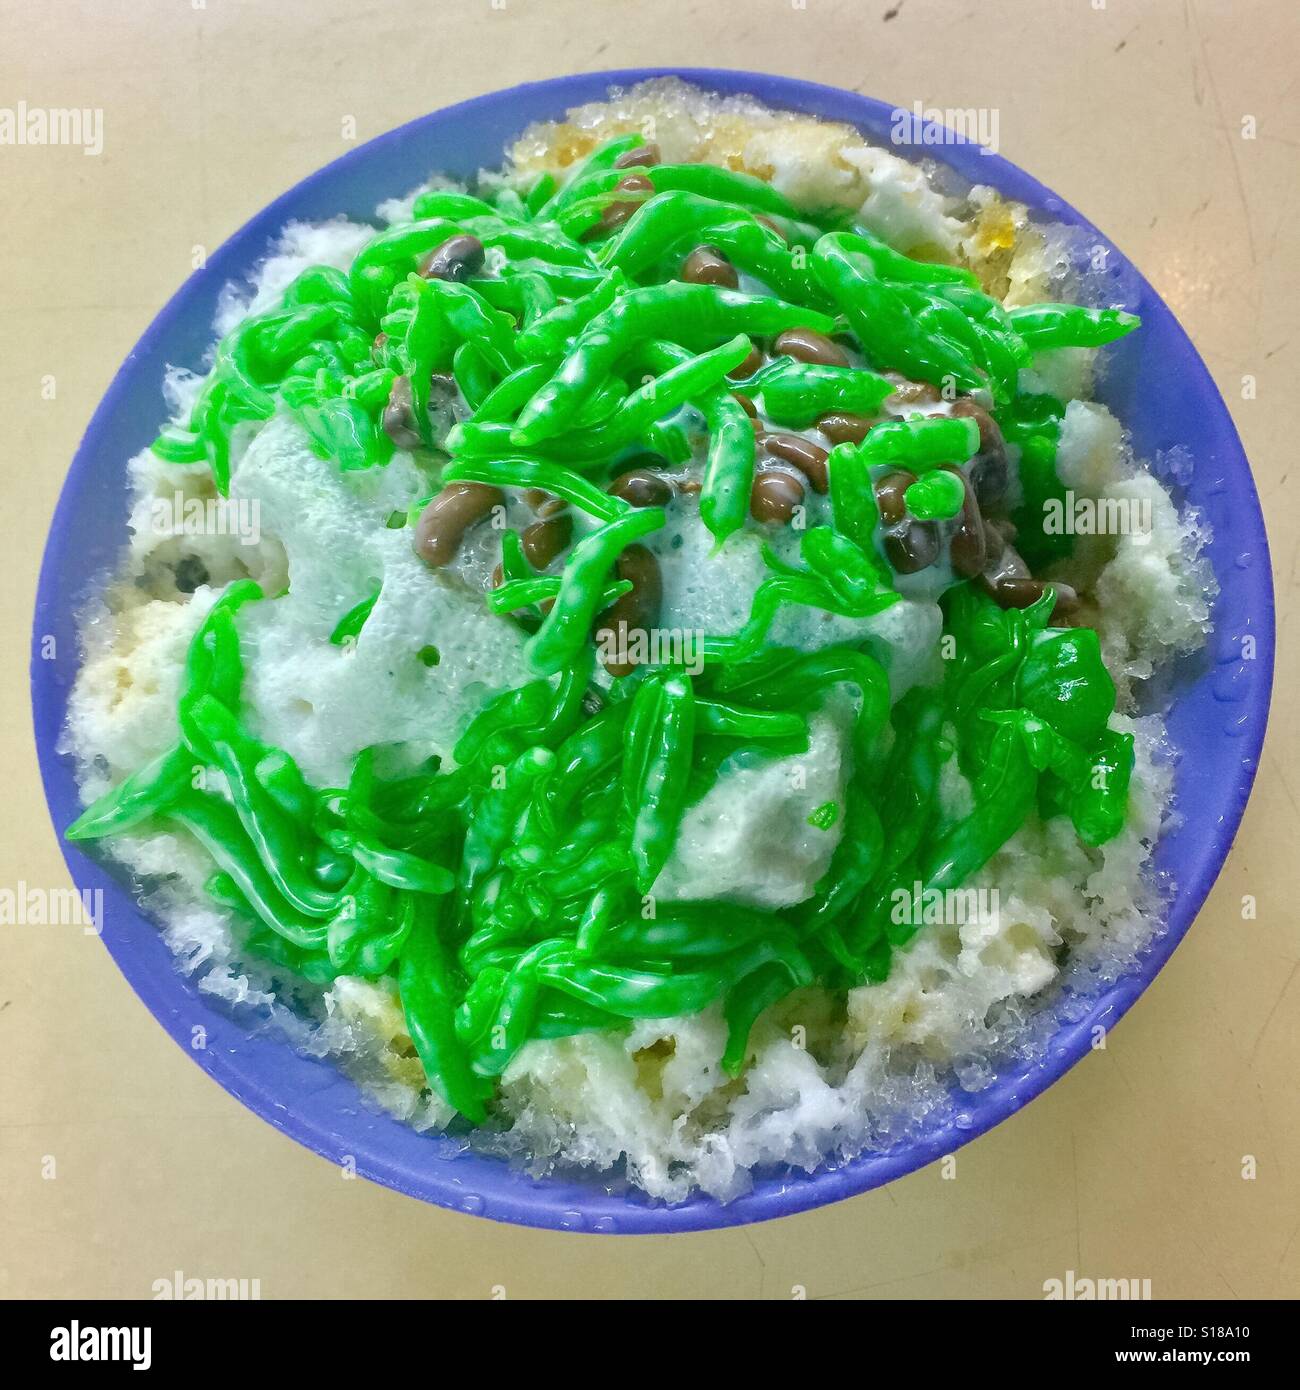 Singapore dessert, Chendol - shaved ice served with green jelly, red beans, palm sugar and coconut milk Stock Photo